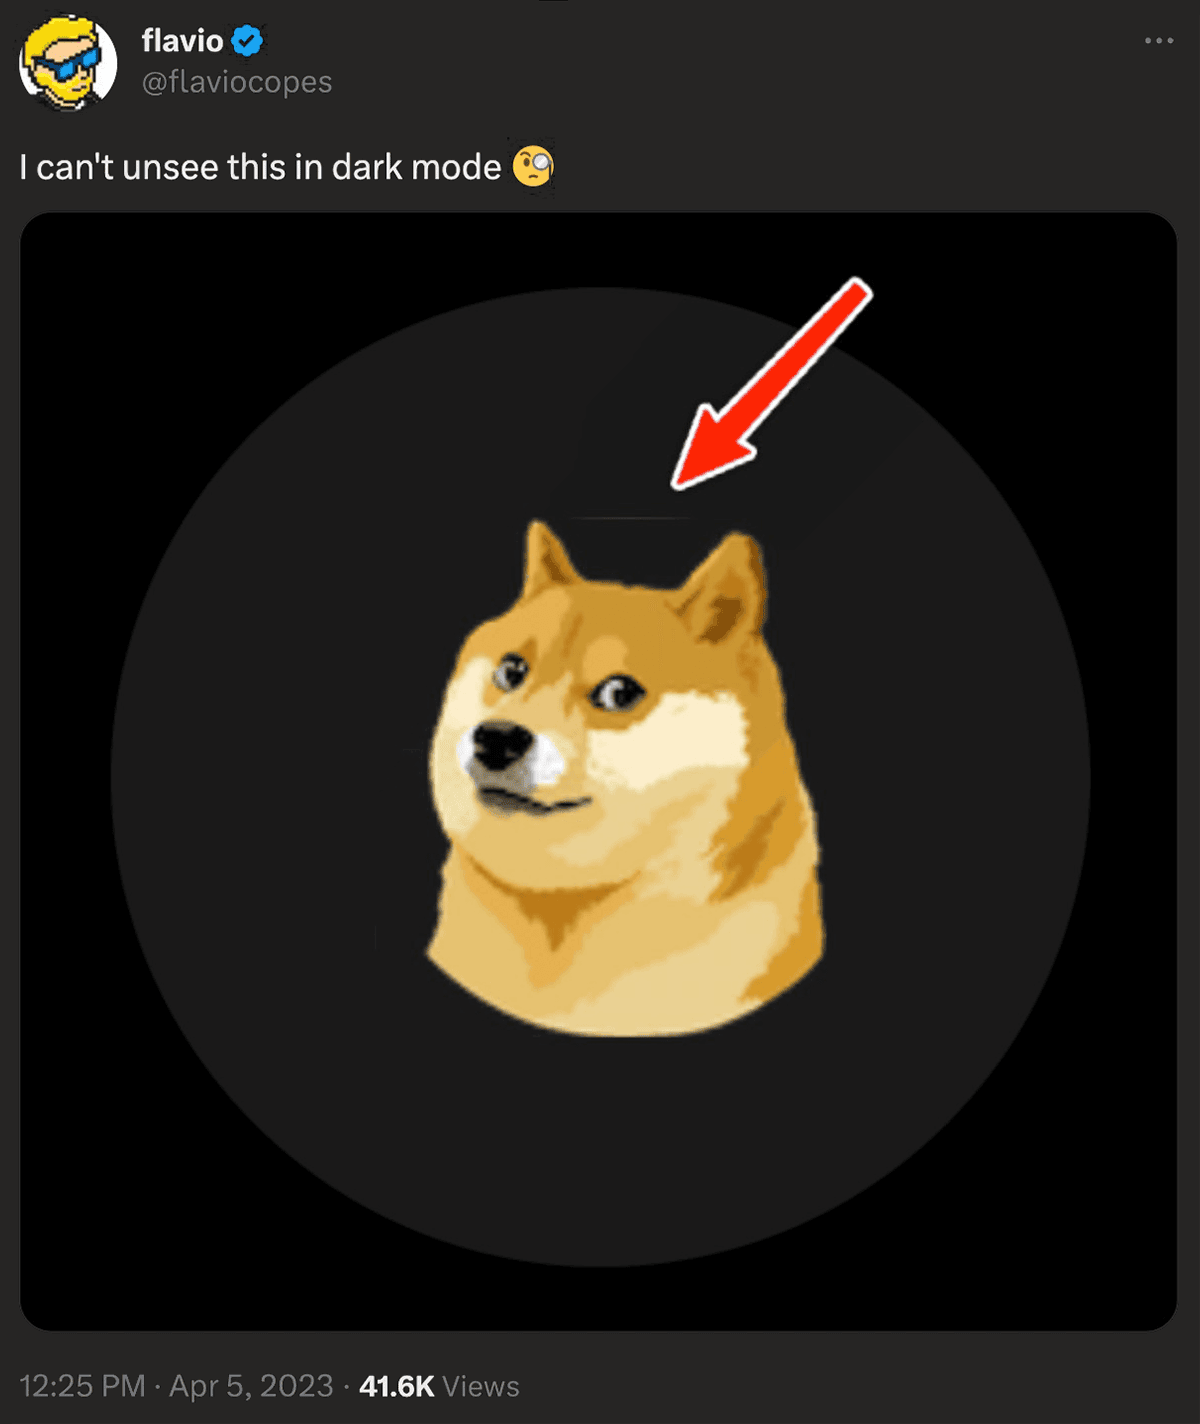 @flaviocopes on twitter: I can't unsee this in dark mode, image of the dogedog logo with a thin grey line between it's ears